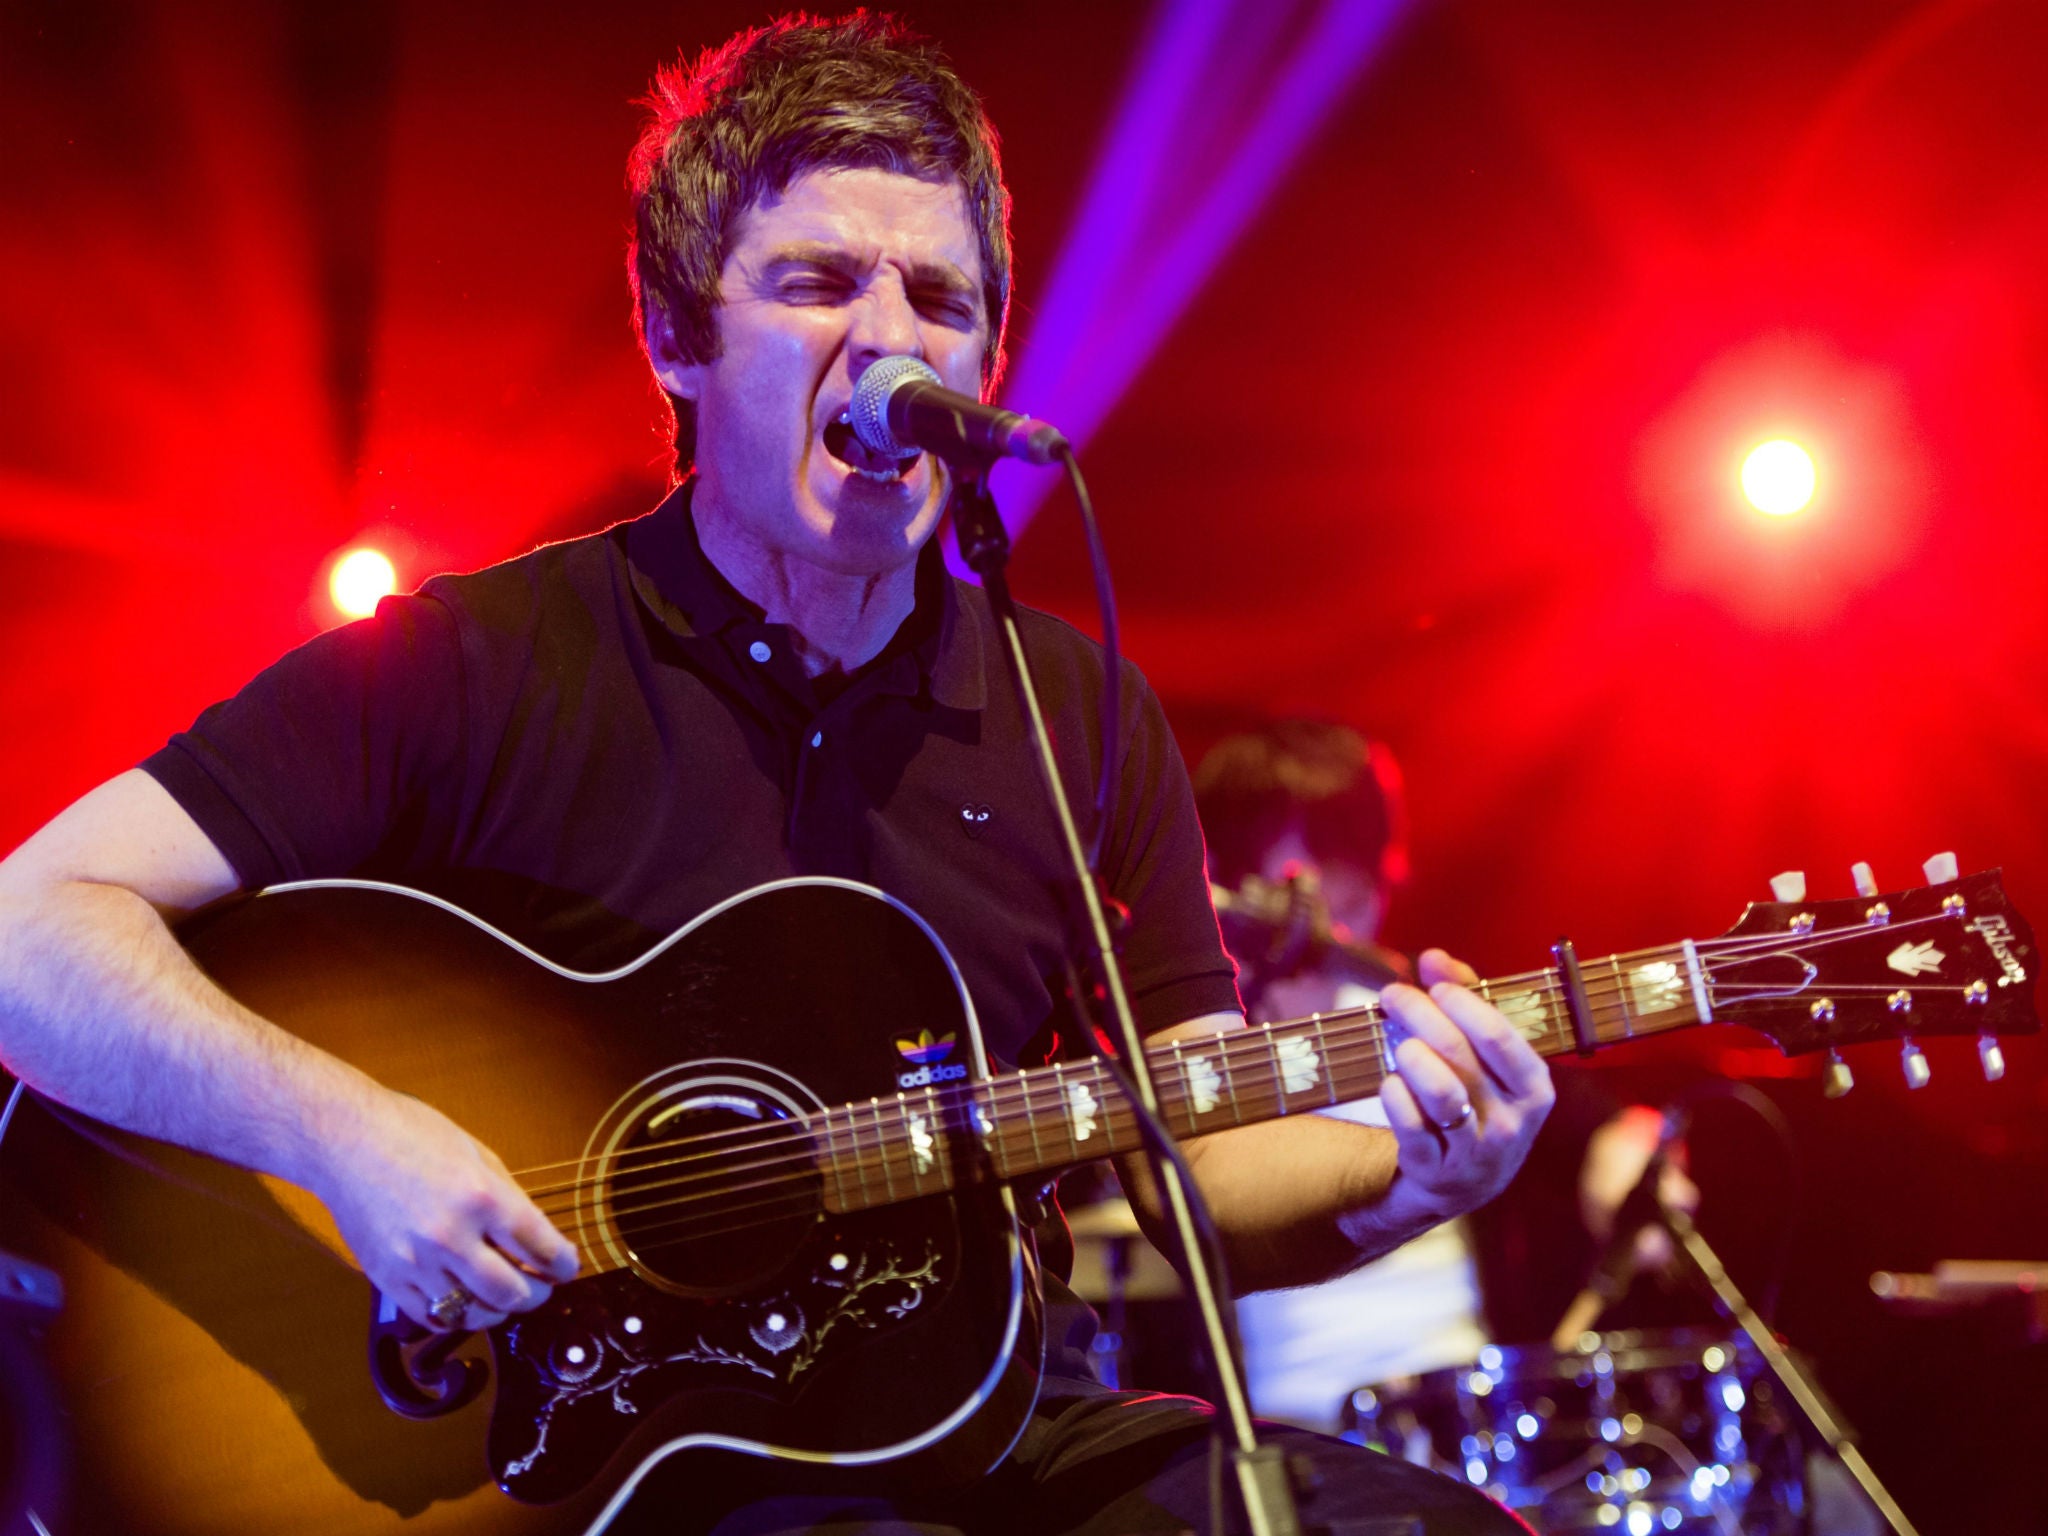 Noel Gallagher performs an acoustic set before his main electric performance